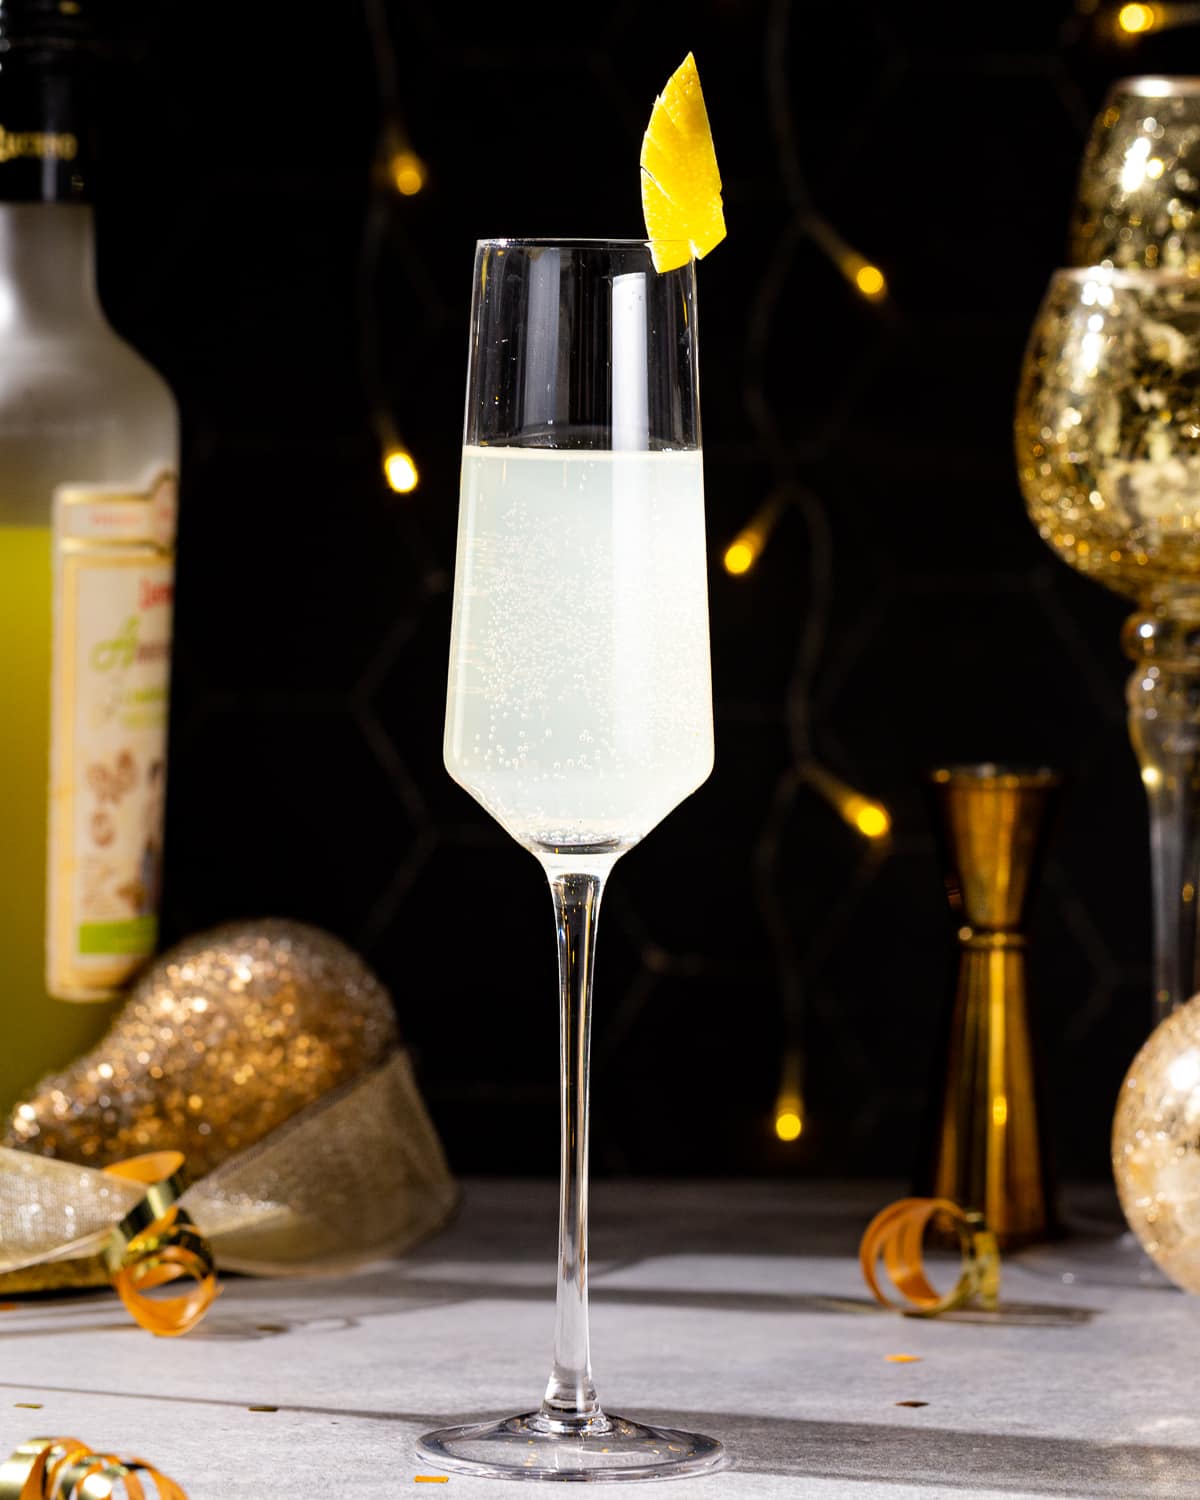 Side view of an Italian 75 cocktail in a Champagne flute. A bottle of Limoncello is visible in the background along with a gold jigger and gold decor. The drink is garnished with a fancy lemon peel on the rim. Gold ribbon curls and gold confetti are on the countertop.